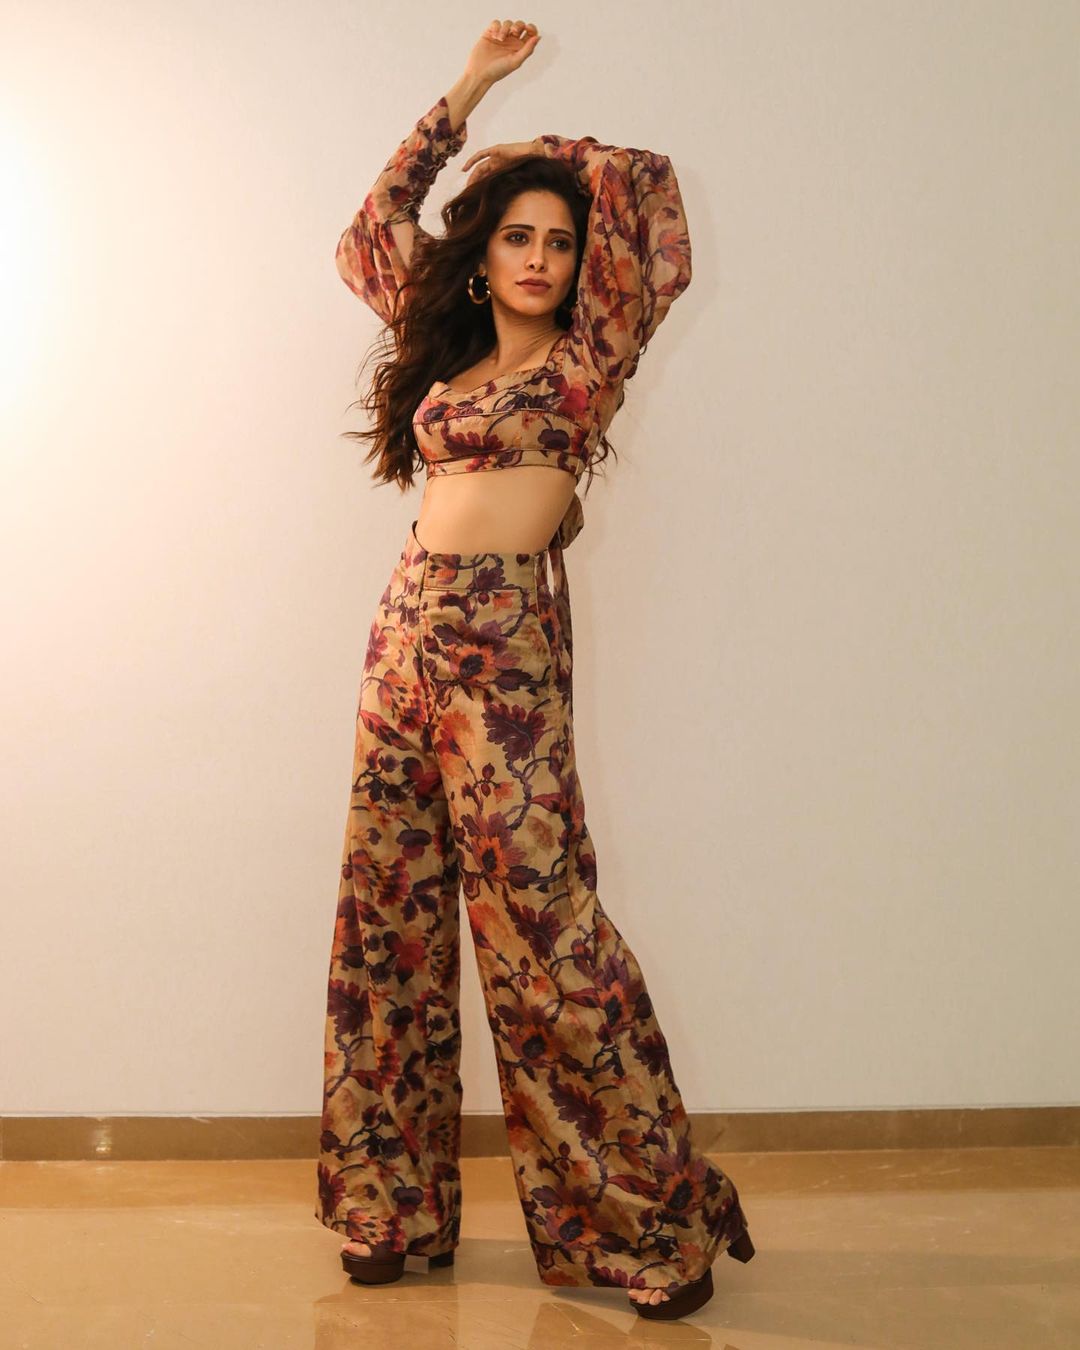  Nushrratt Bharuccha looks cool in the floral crop top and matching wide-legged pants. (Image: Instagram)